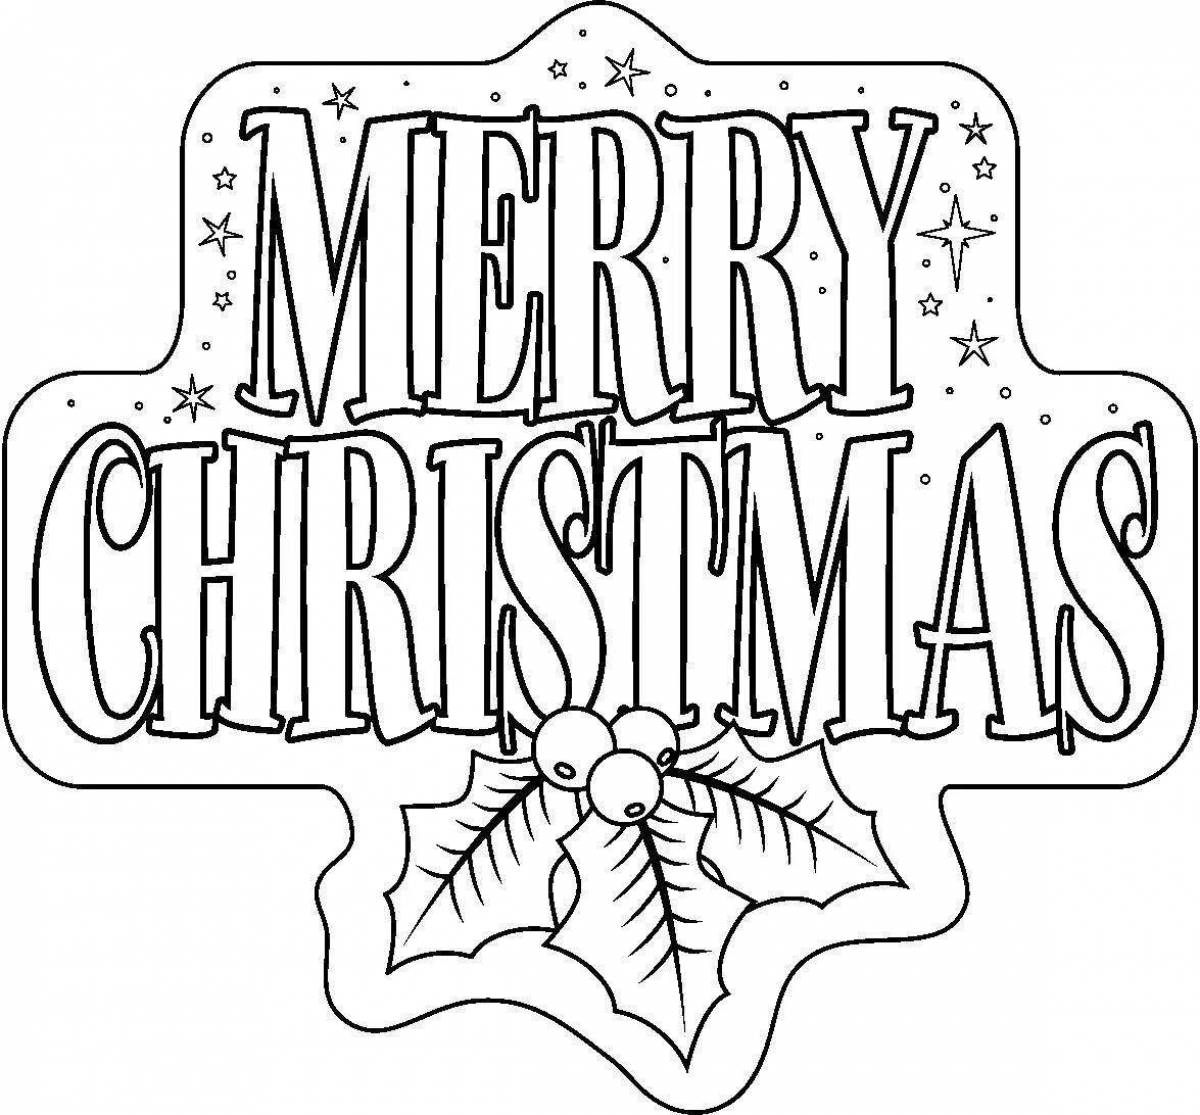 Festive merry christmas coloring book